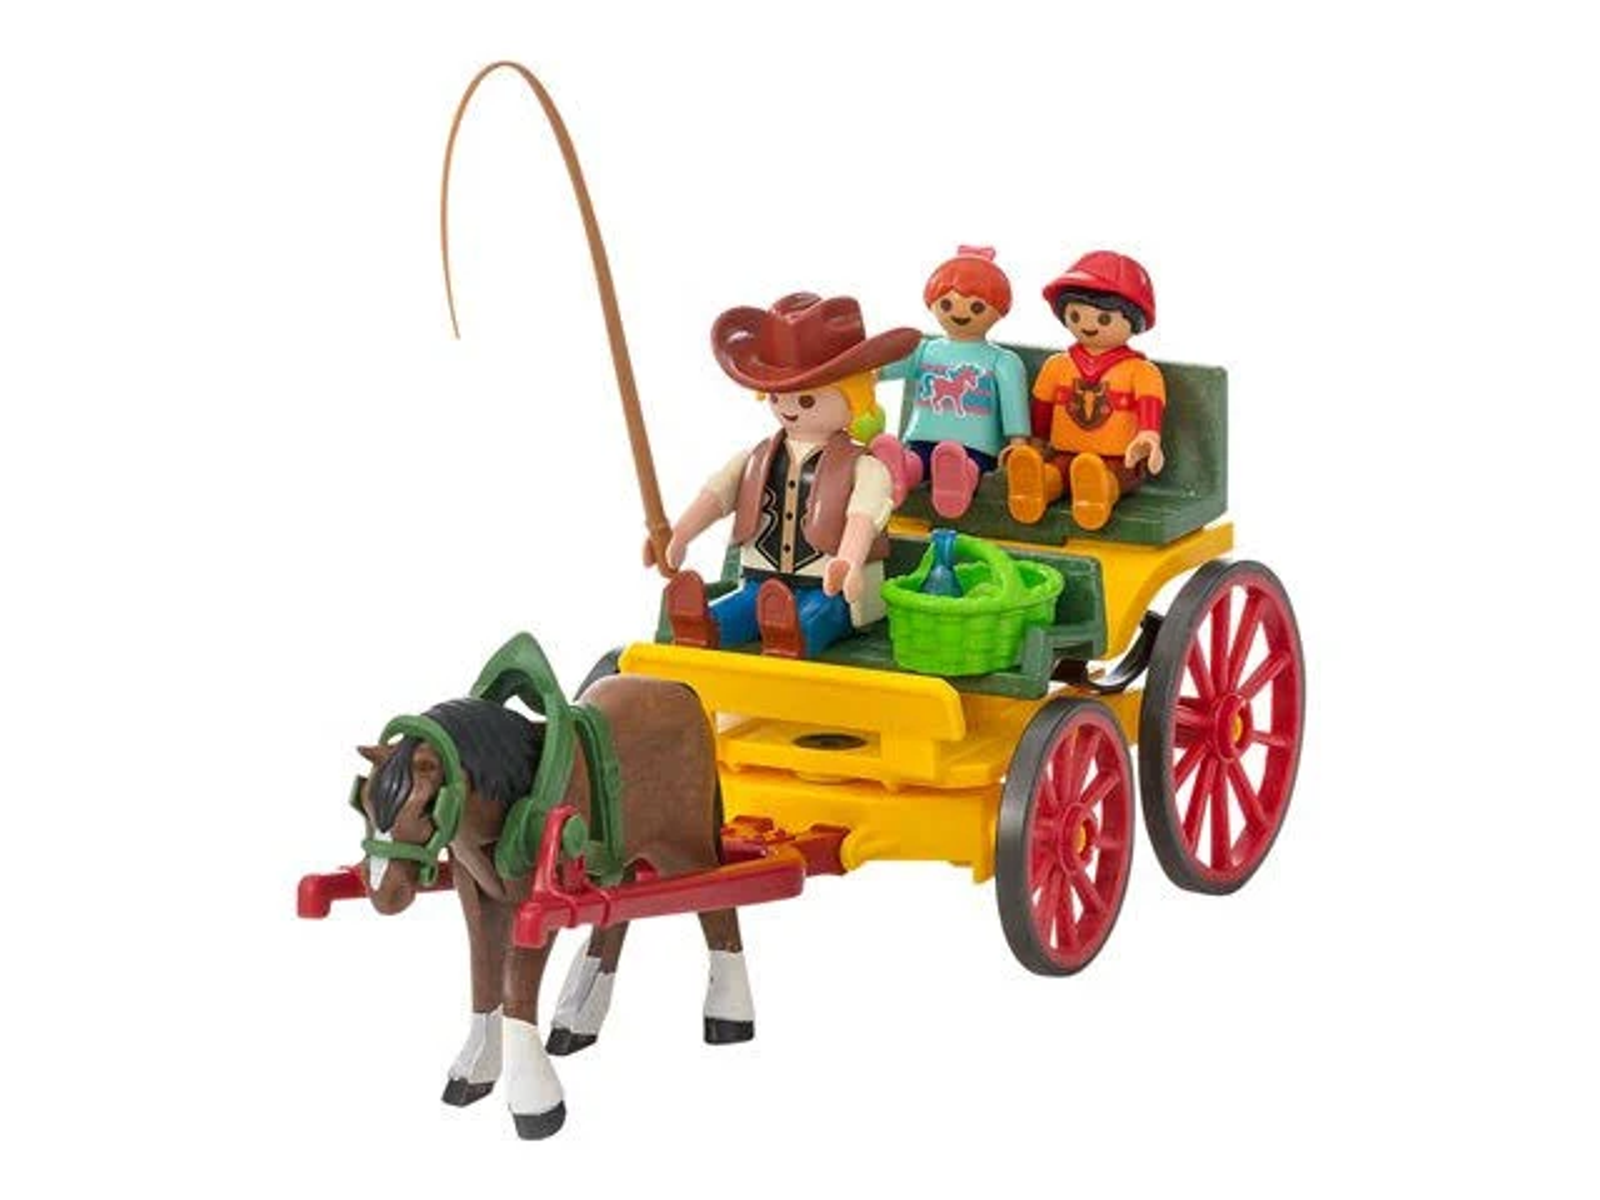 PLAYMOBIL Spielzeugsets 6932